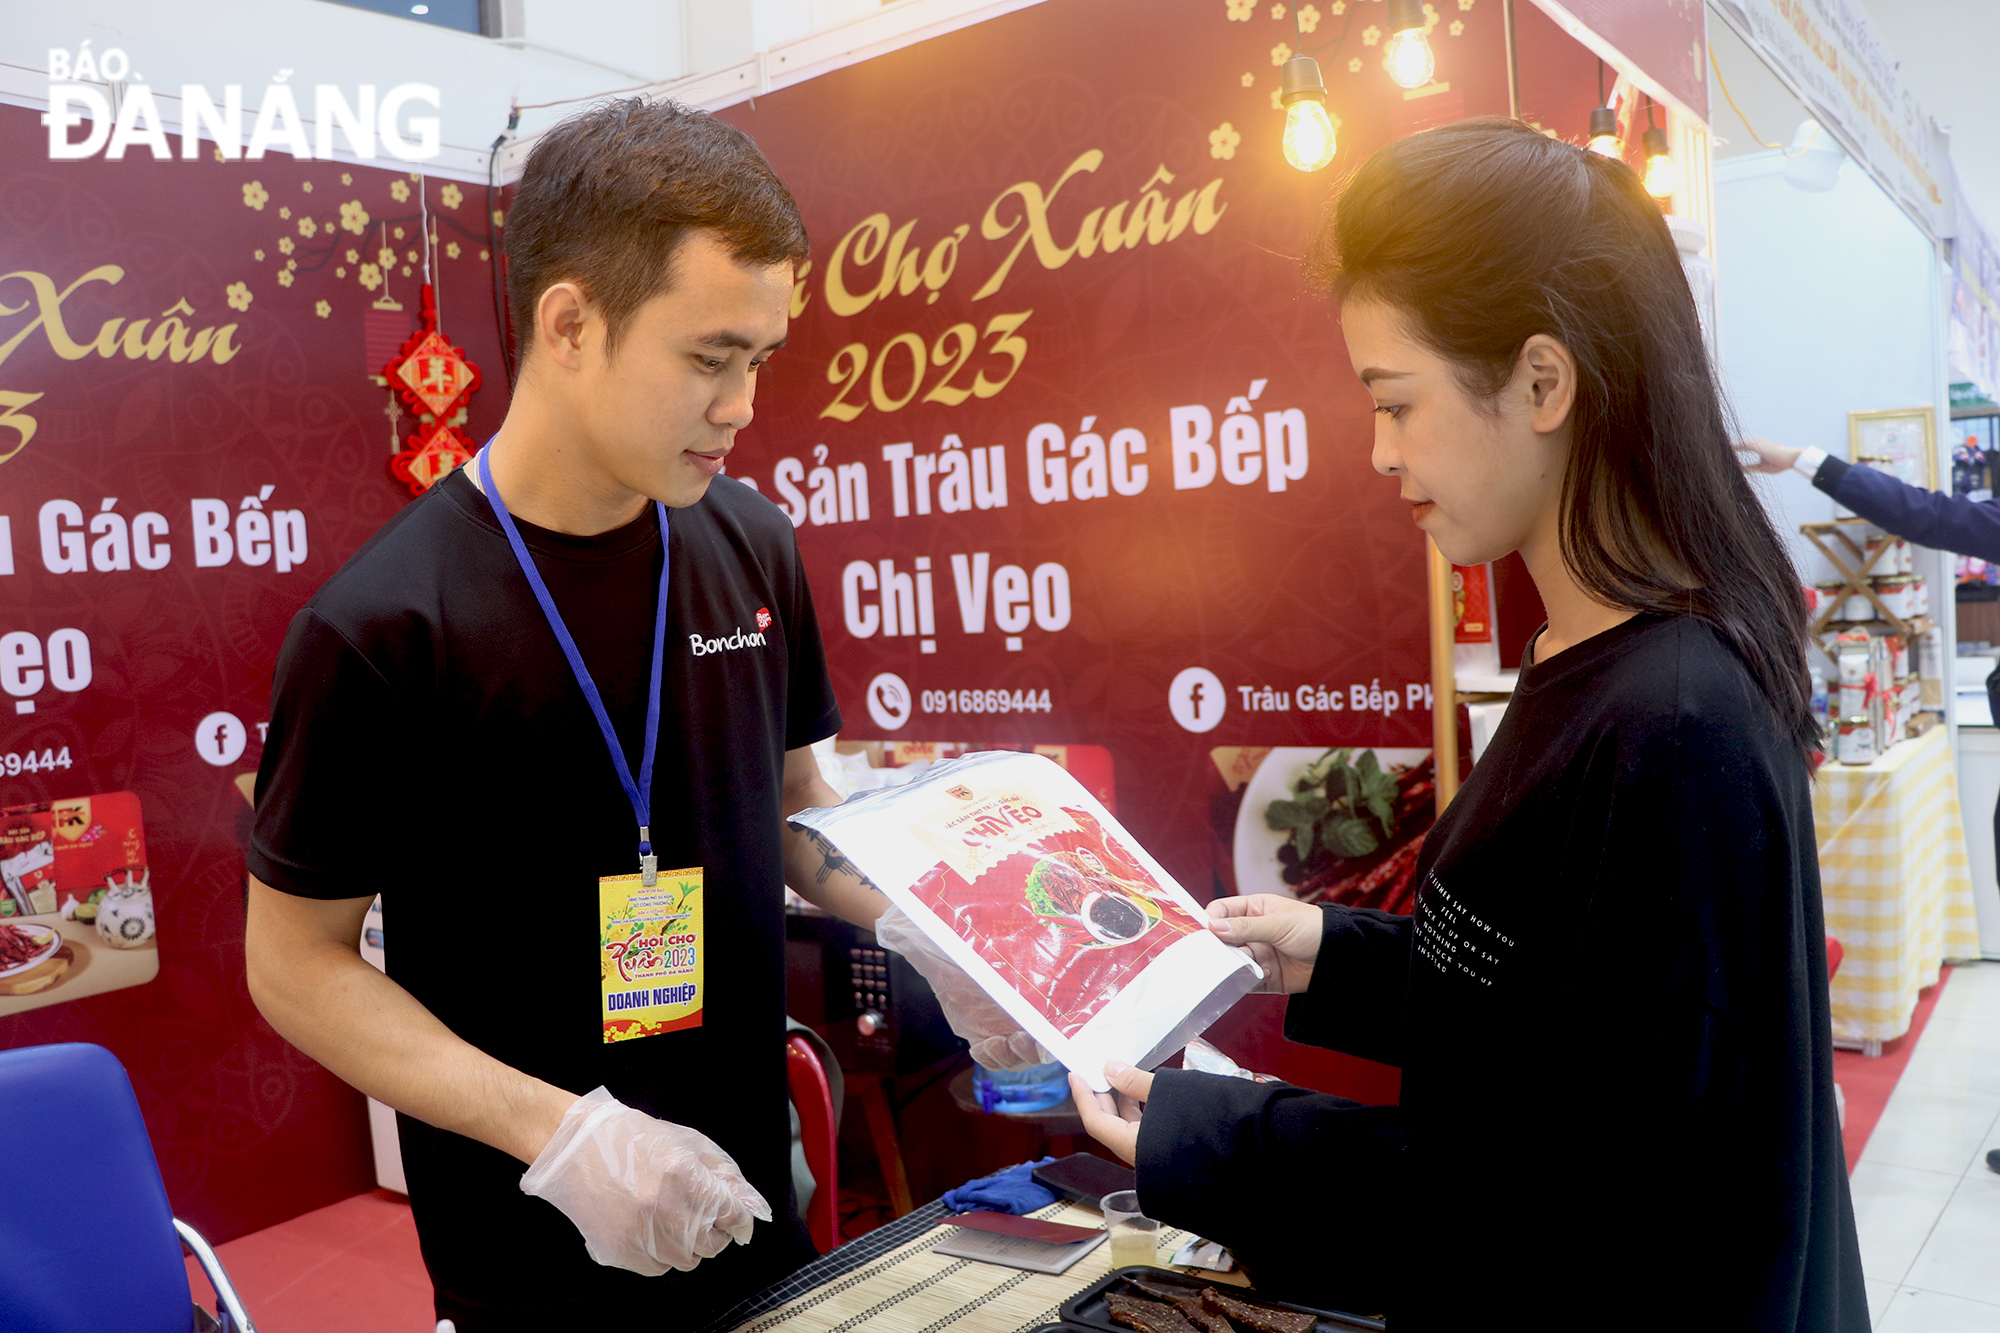 Visitors are seen at the Da Nang Spring Fair on the evening of January 11.